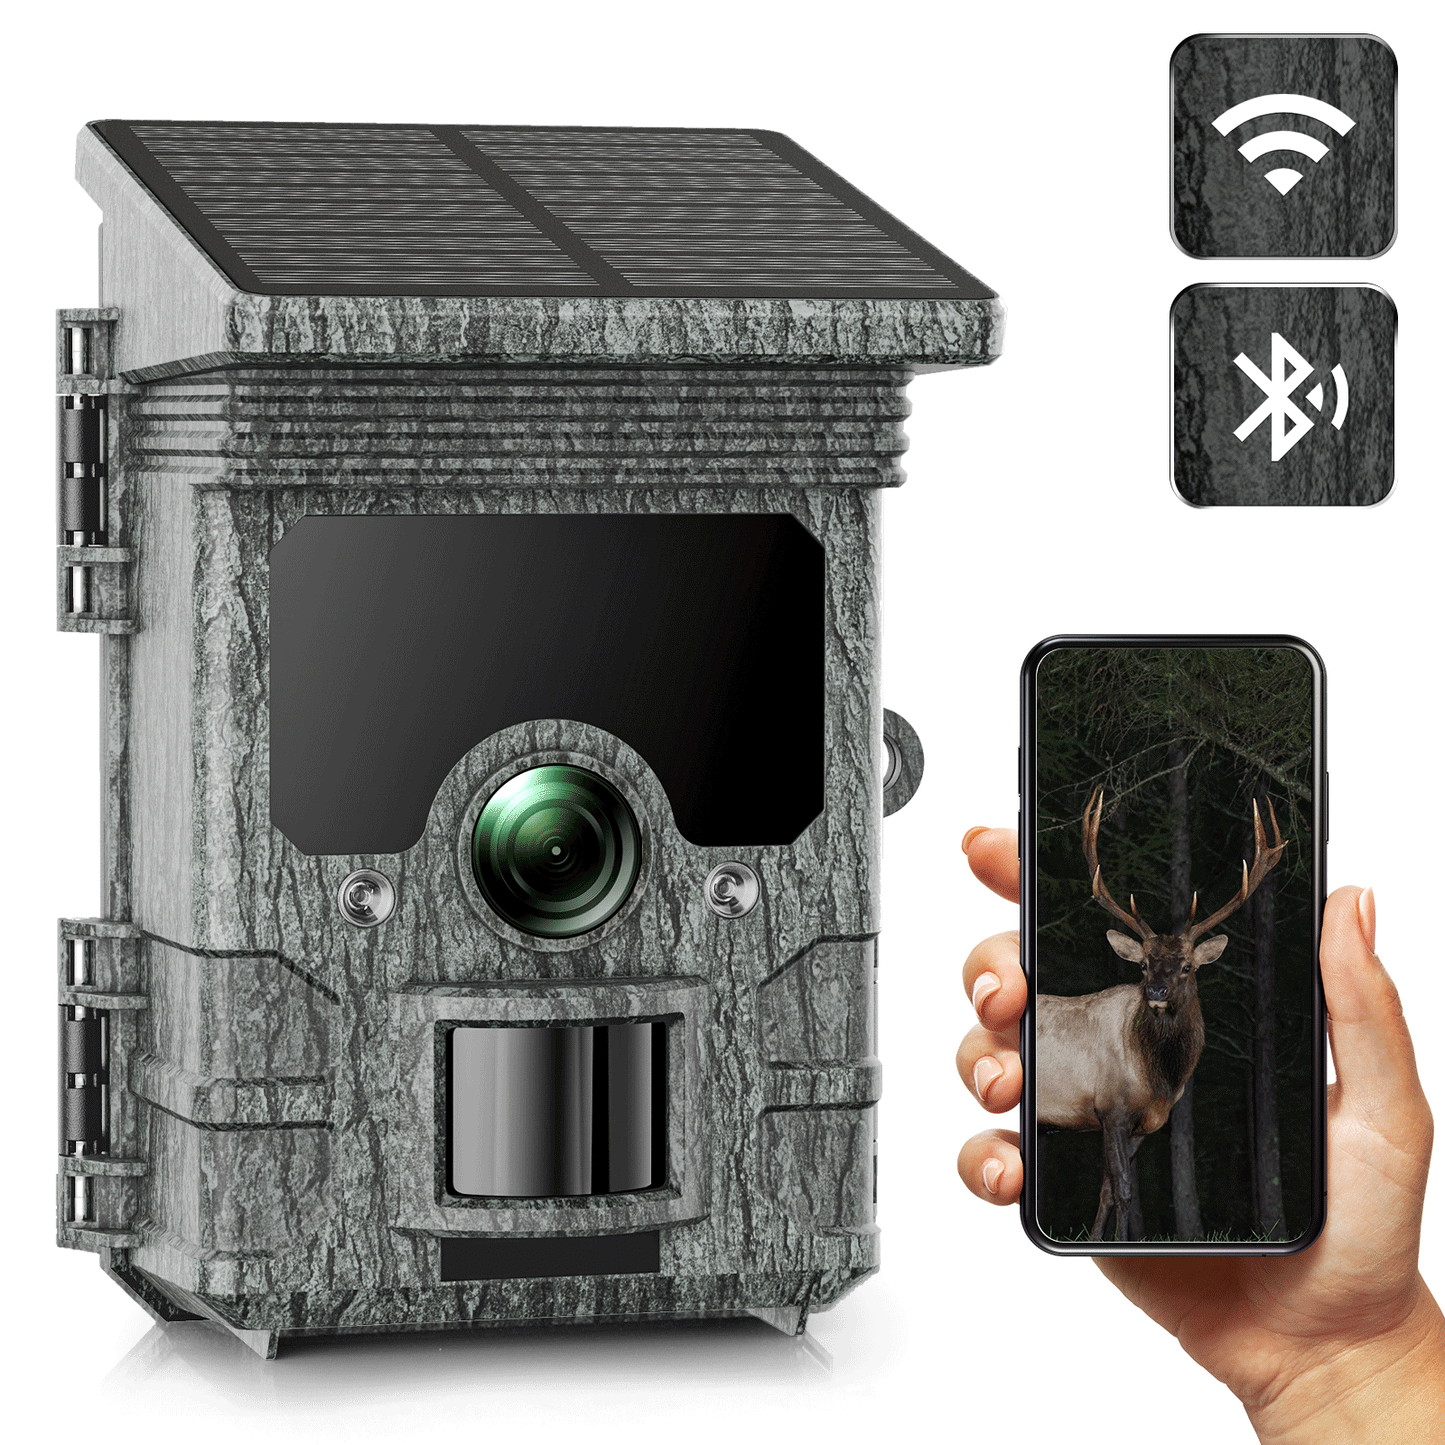 CAMPARK Trail Camera 2K WiFi Bluetooth Night Vision Deer Game Camera 24MP with 120°PIR Range Hunting Scouting Camera with IP66 Waterproof for Wildlife Monitoring Property Security